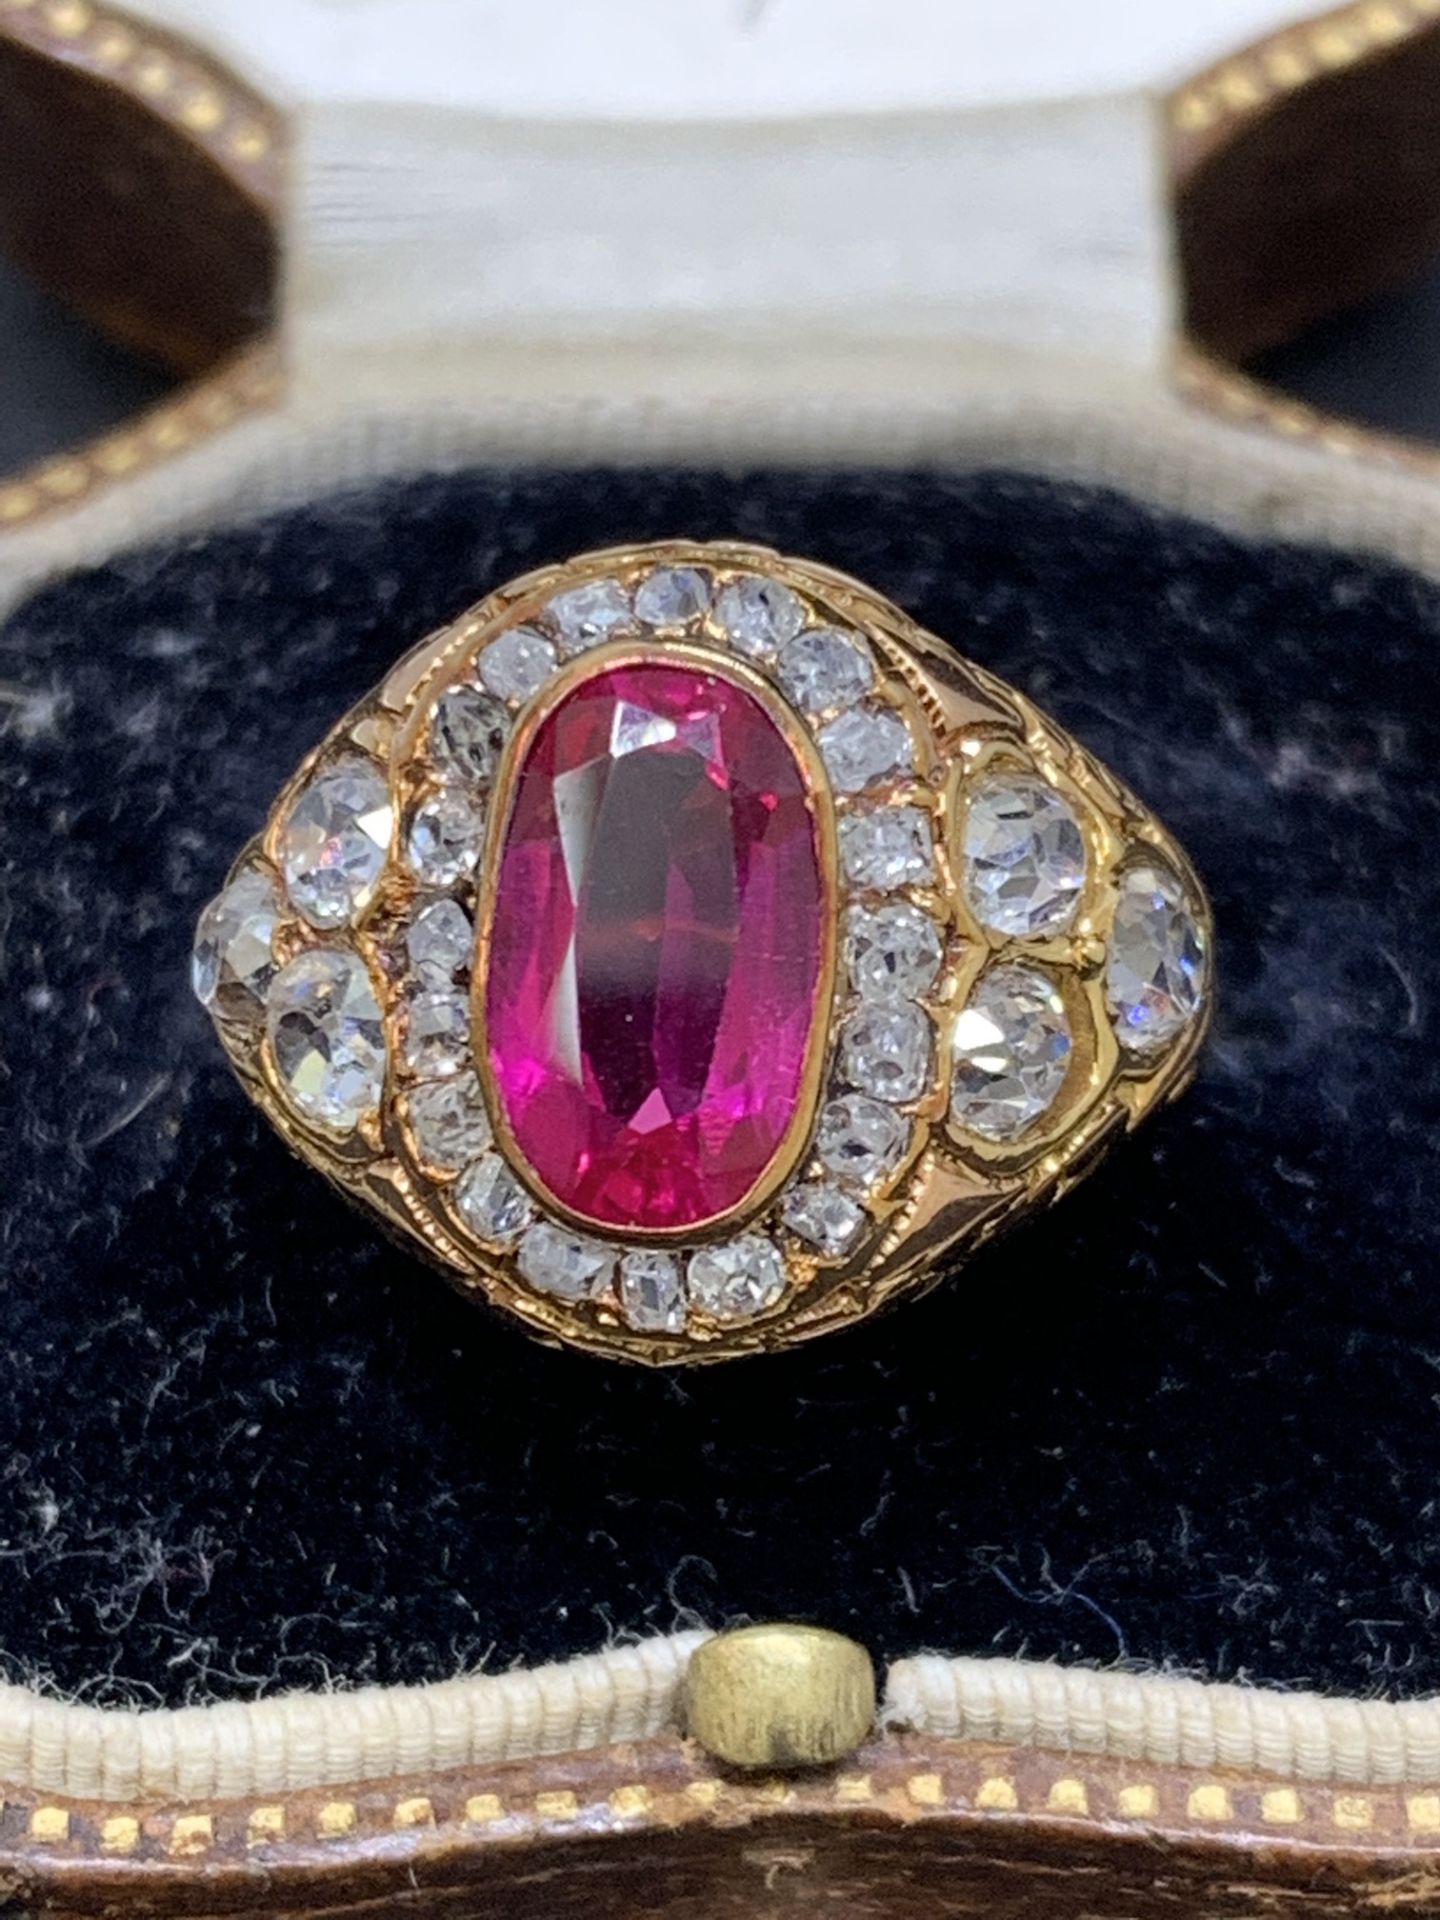 Vintage 18 carat gold ring set with ruby type stone & 1.3 carats of old mine cut diamonds - Image 3 of 5